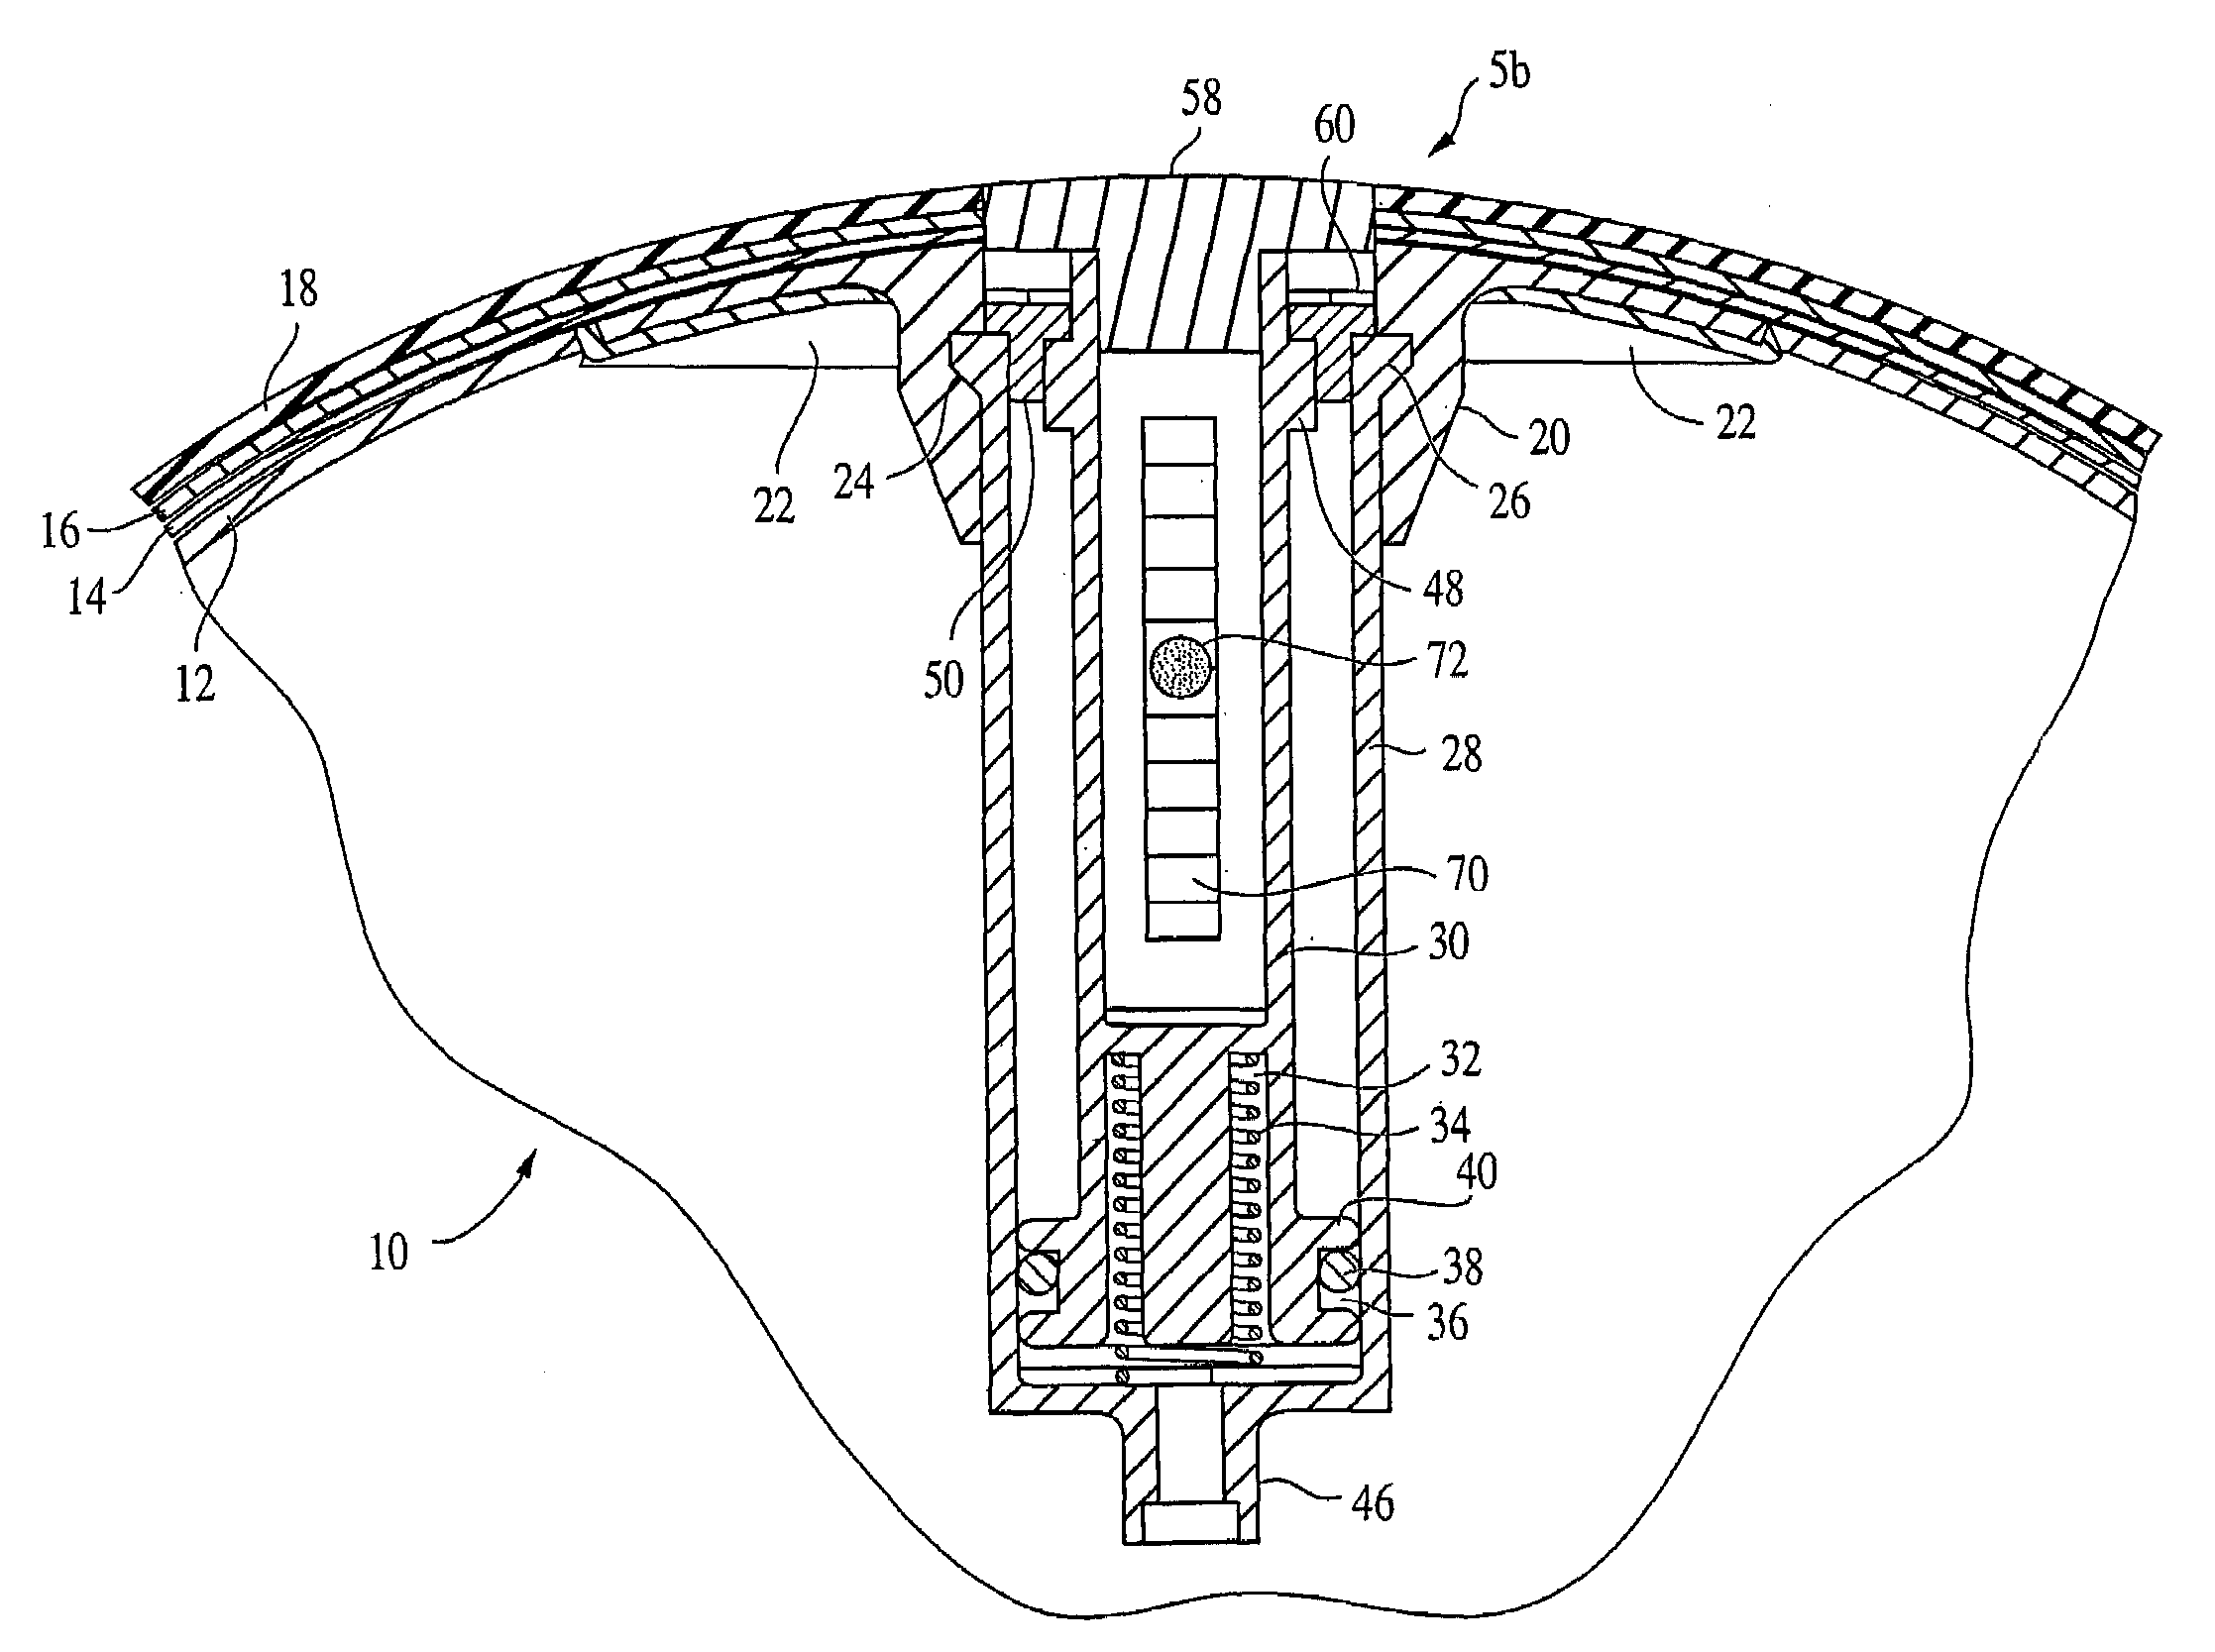 Sport ball with self-contained inflation mechanism having pressure relief and indication capability